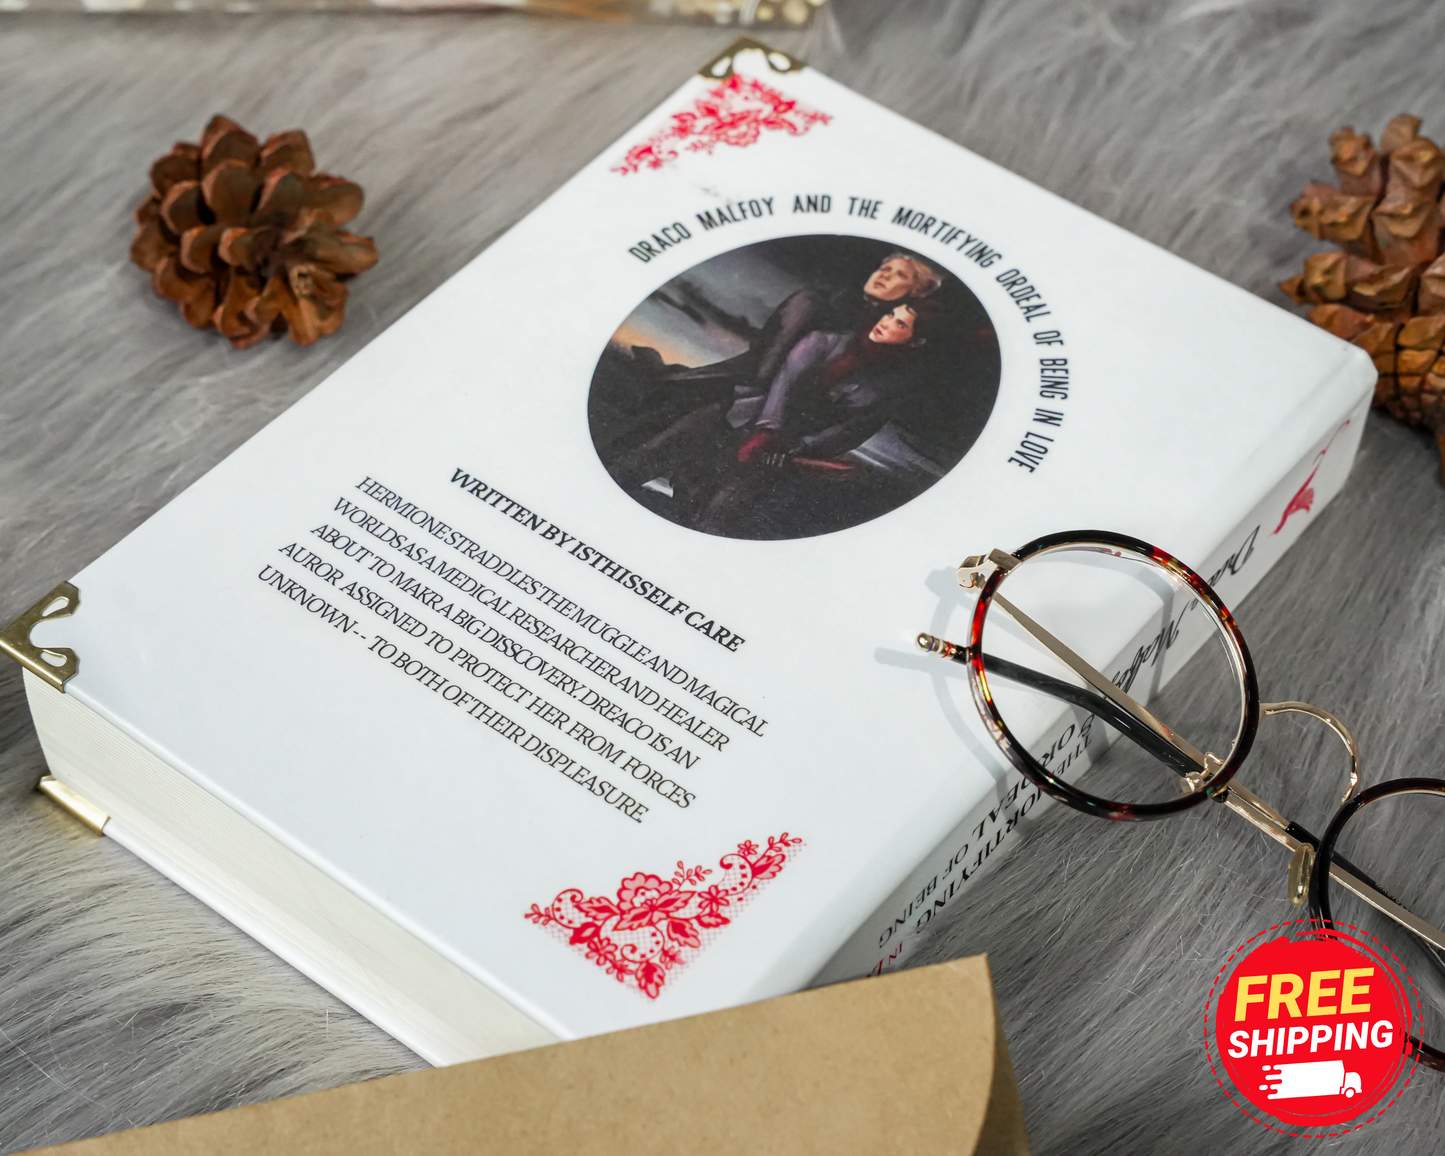 Draco Malfoy's Enchanting Love Dilemma: The Complete Dramione Saga - Deluxe Hardcover Edition. The Perfect Enchanting Gift for Her